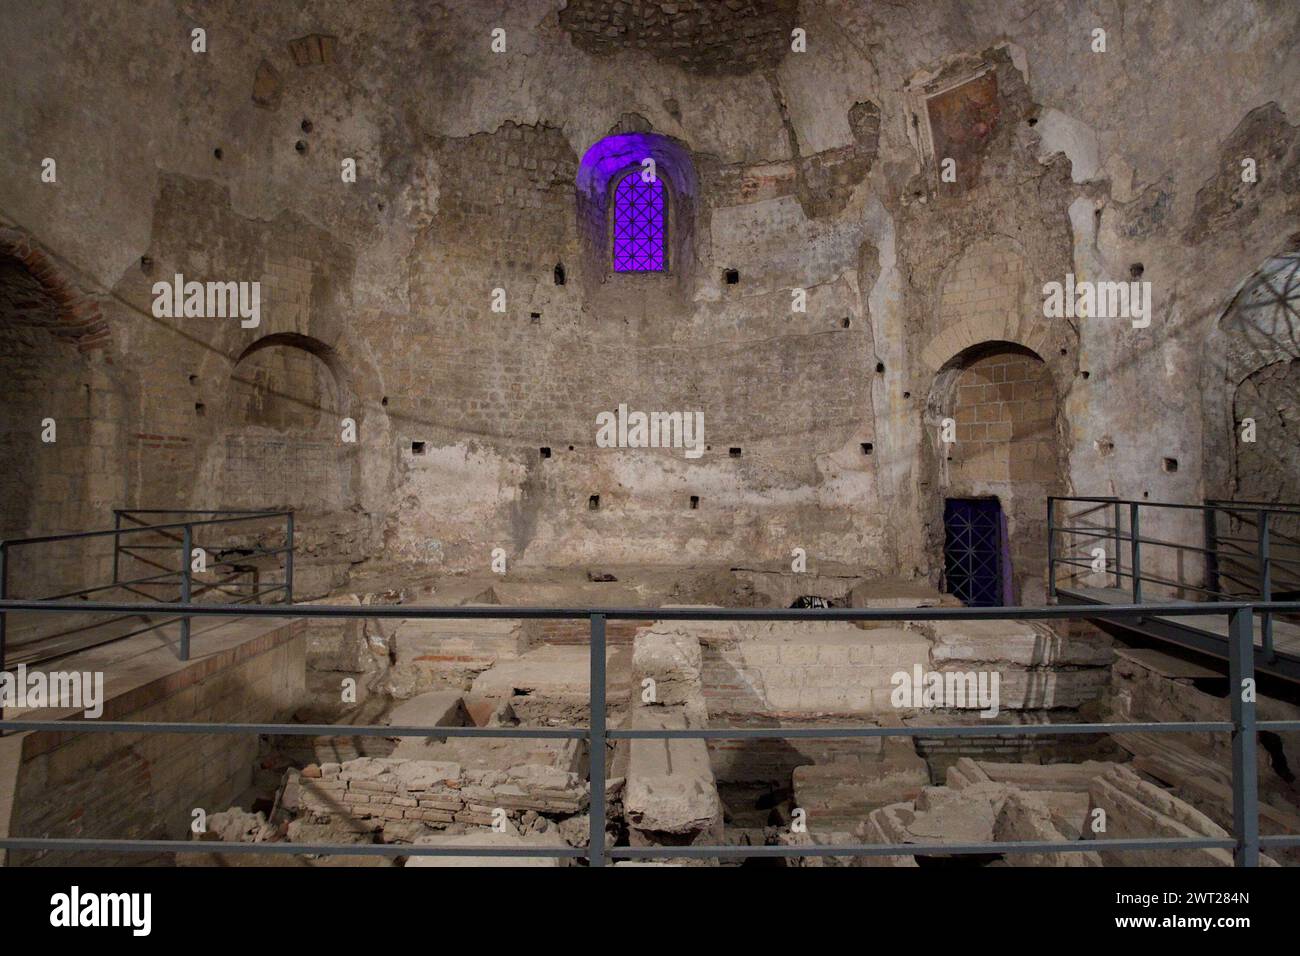 An internal view of the Paleochristian Basilicas at Cimitile Stock Photo